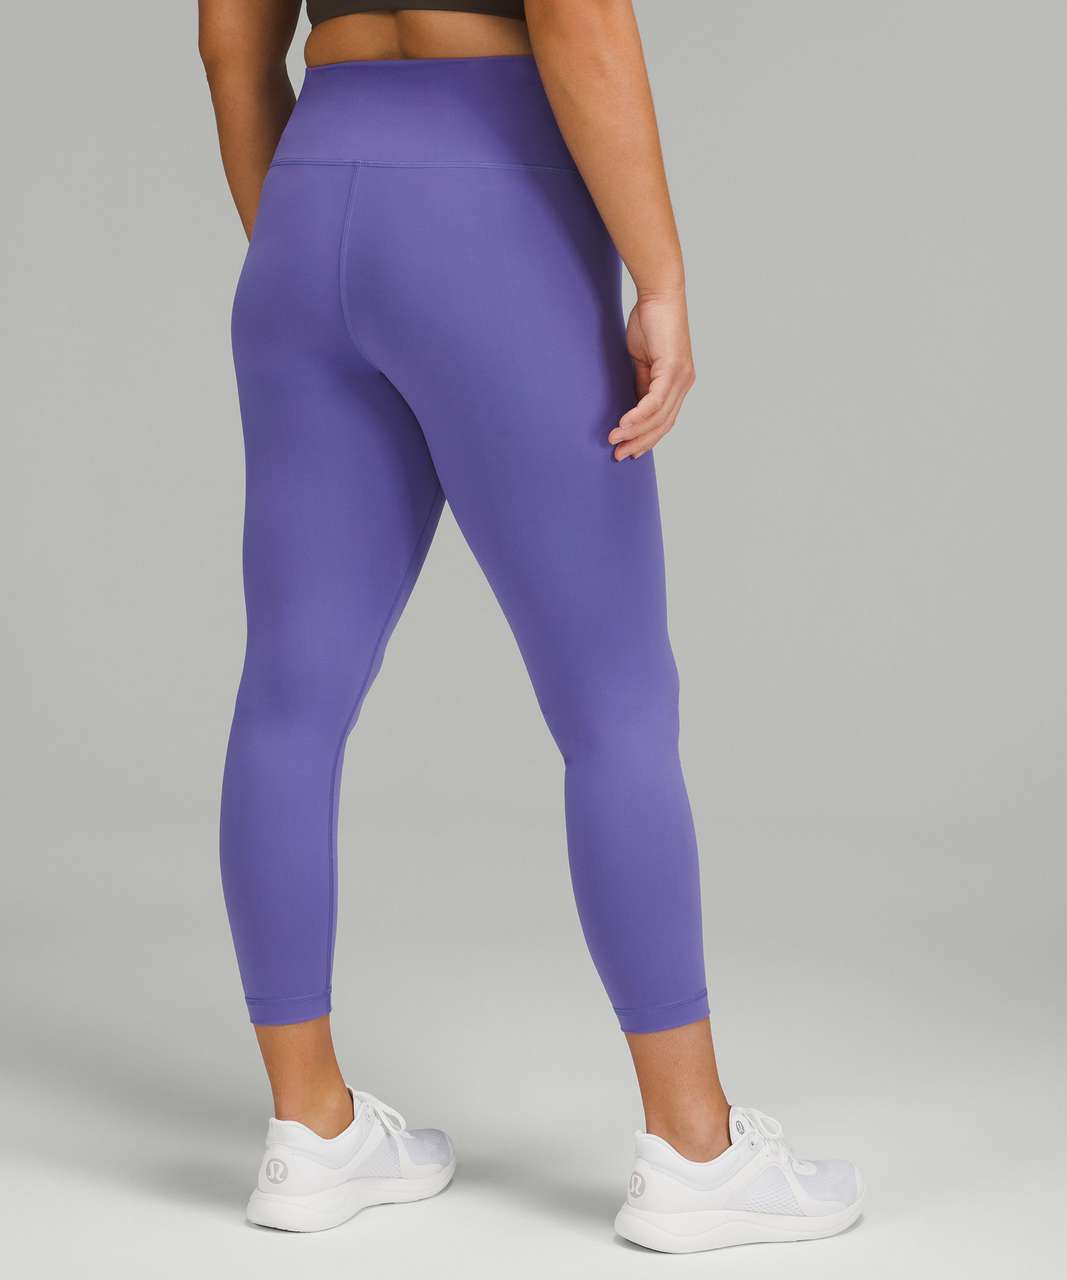 lululemon High Rise Catalyst Wunder Train Tights 25 Size 8